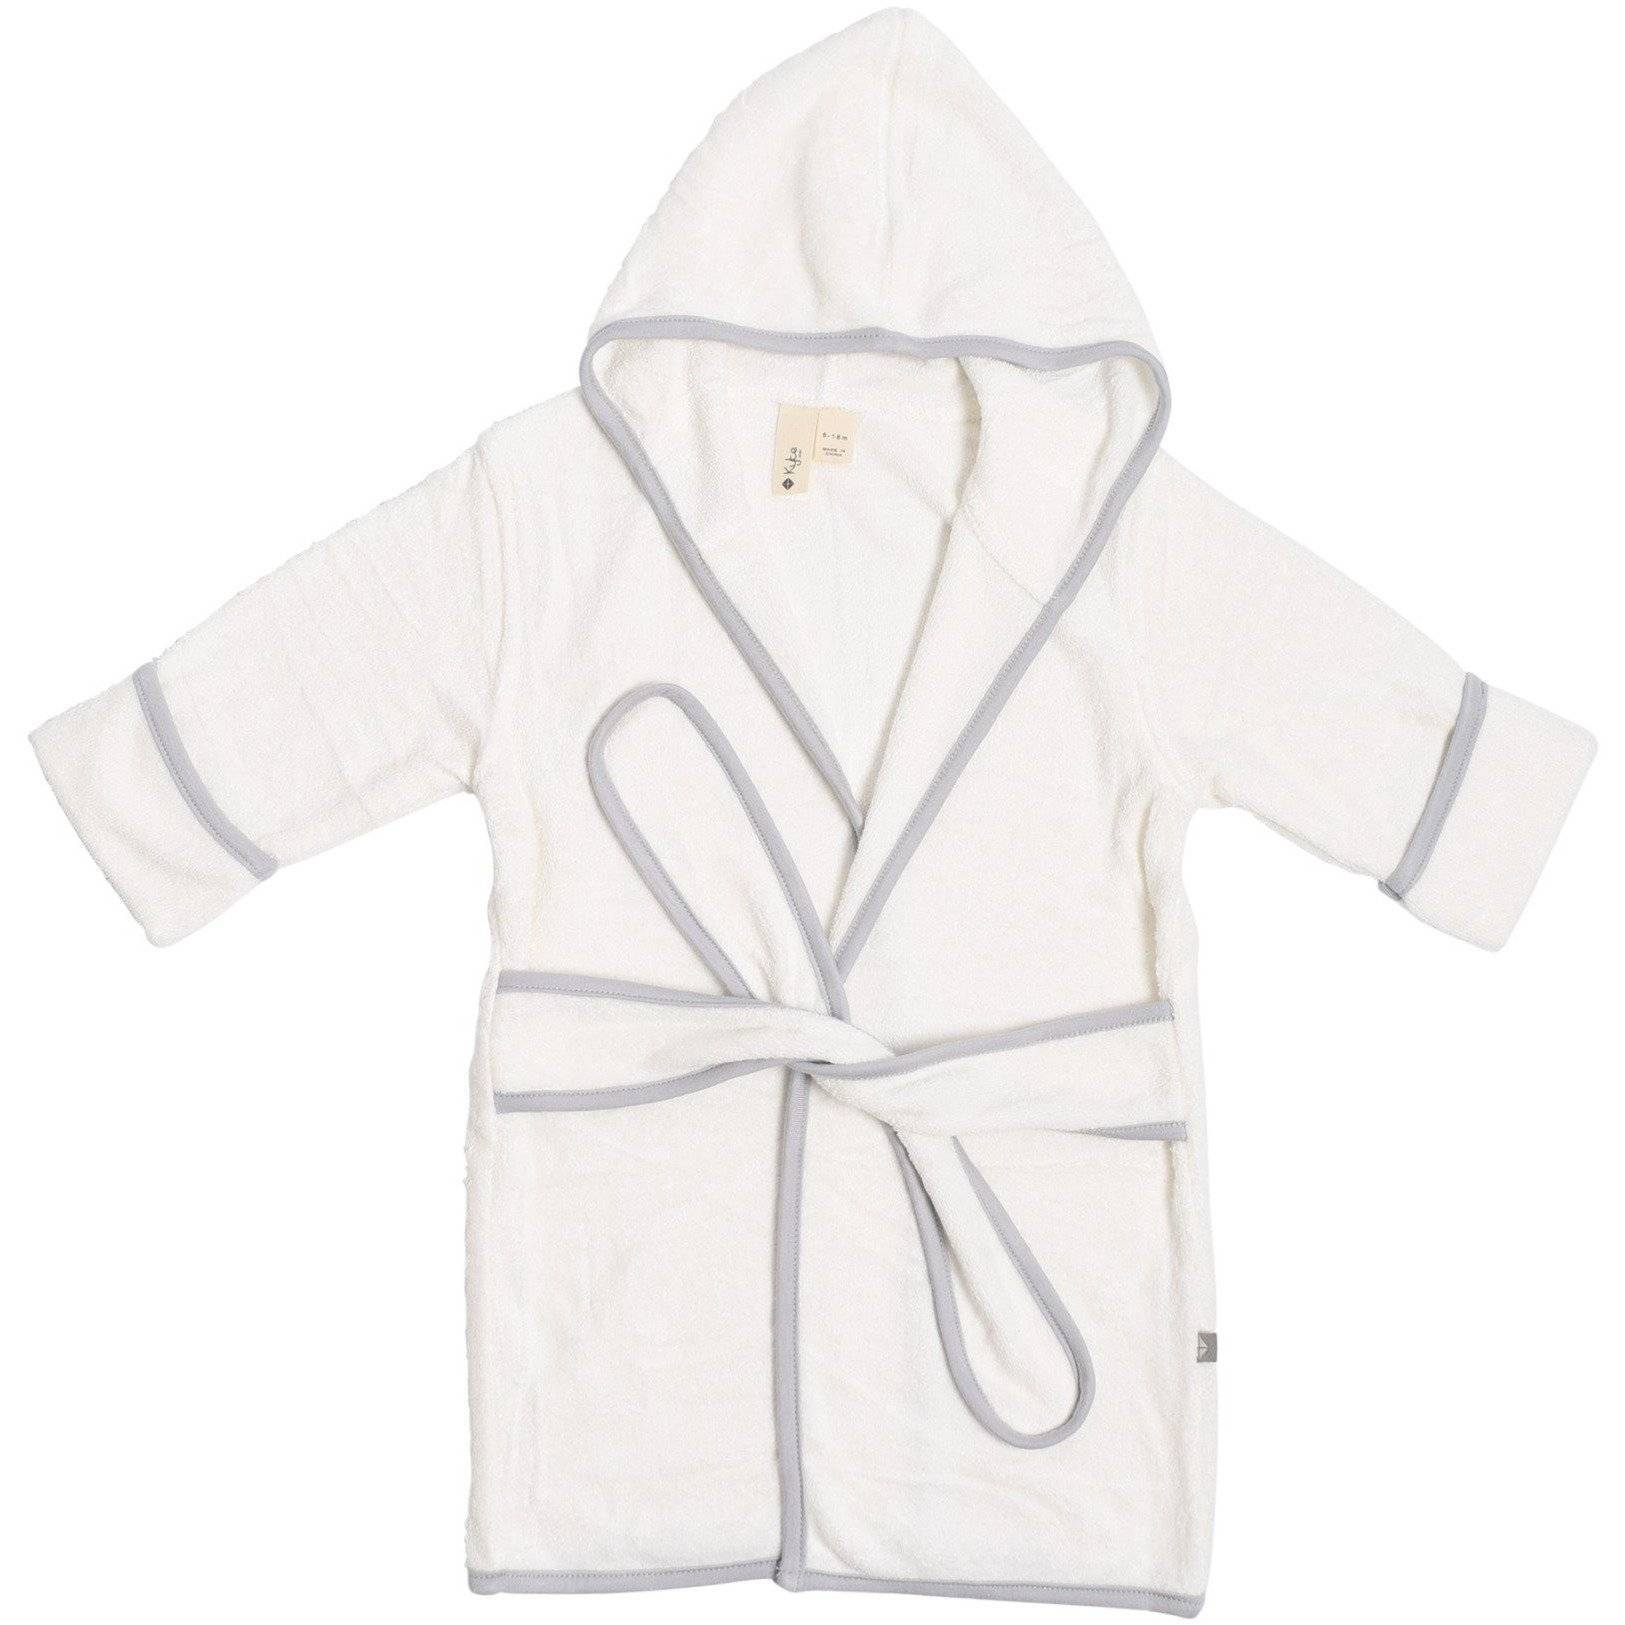 Kyte BABY Home and Bath Toddler Bath Robe in Cloud with Storm Trim